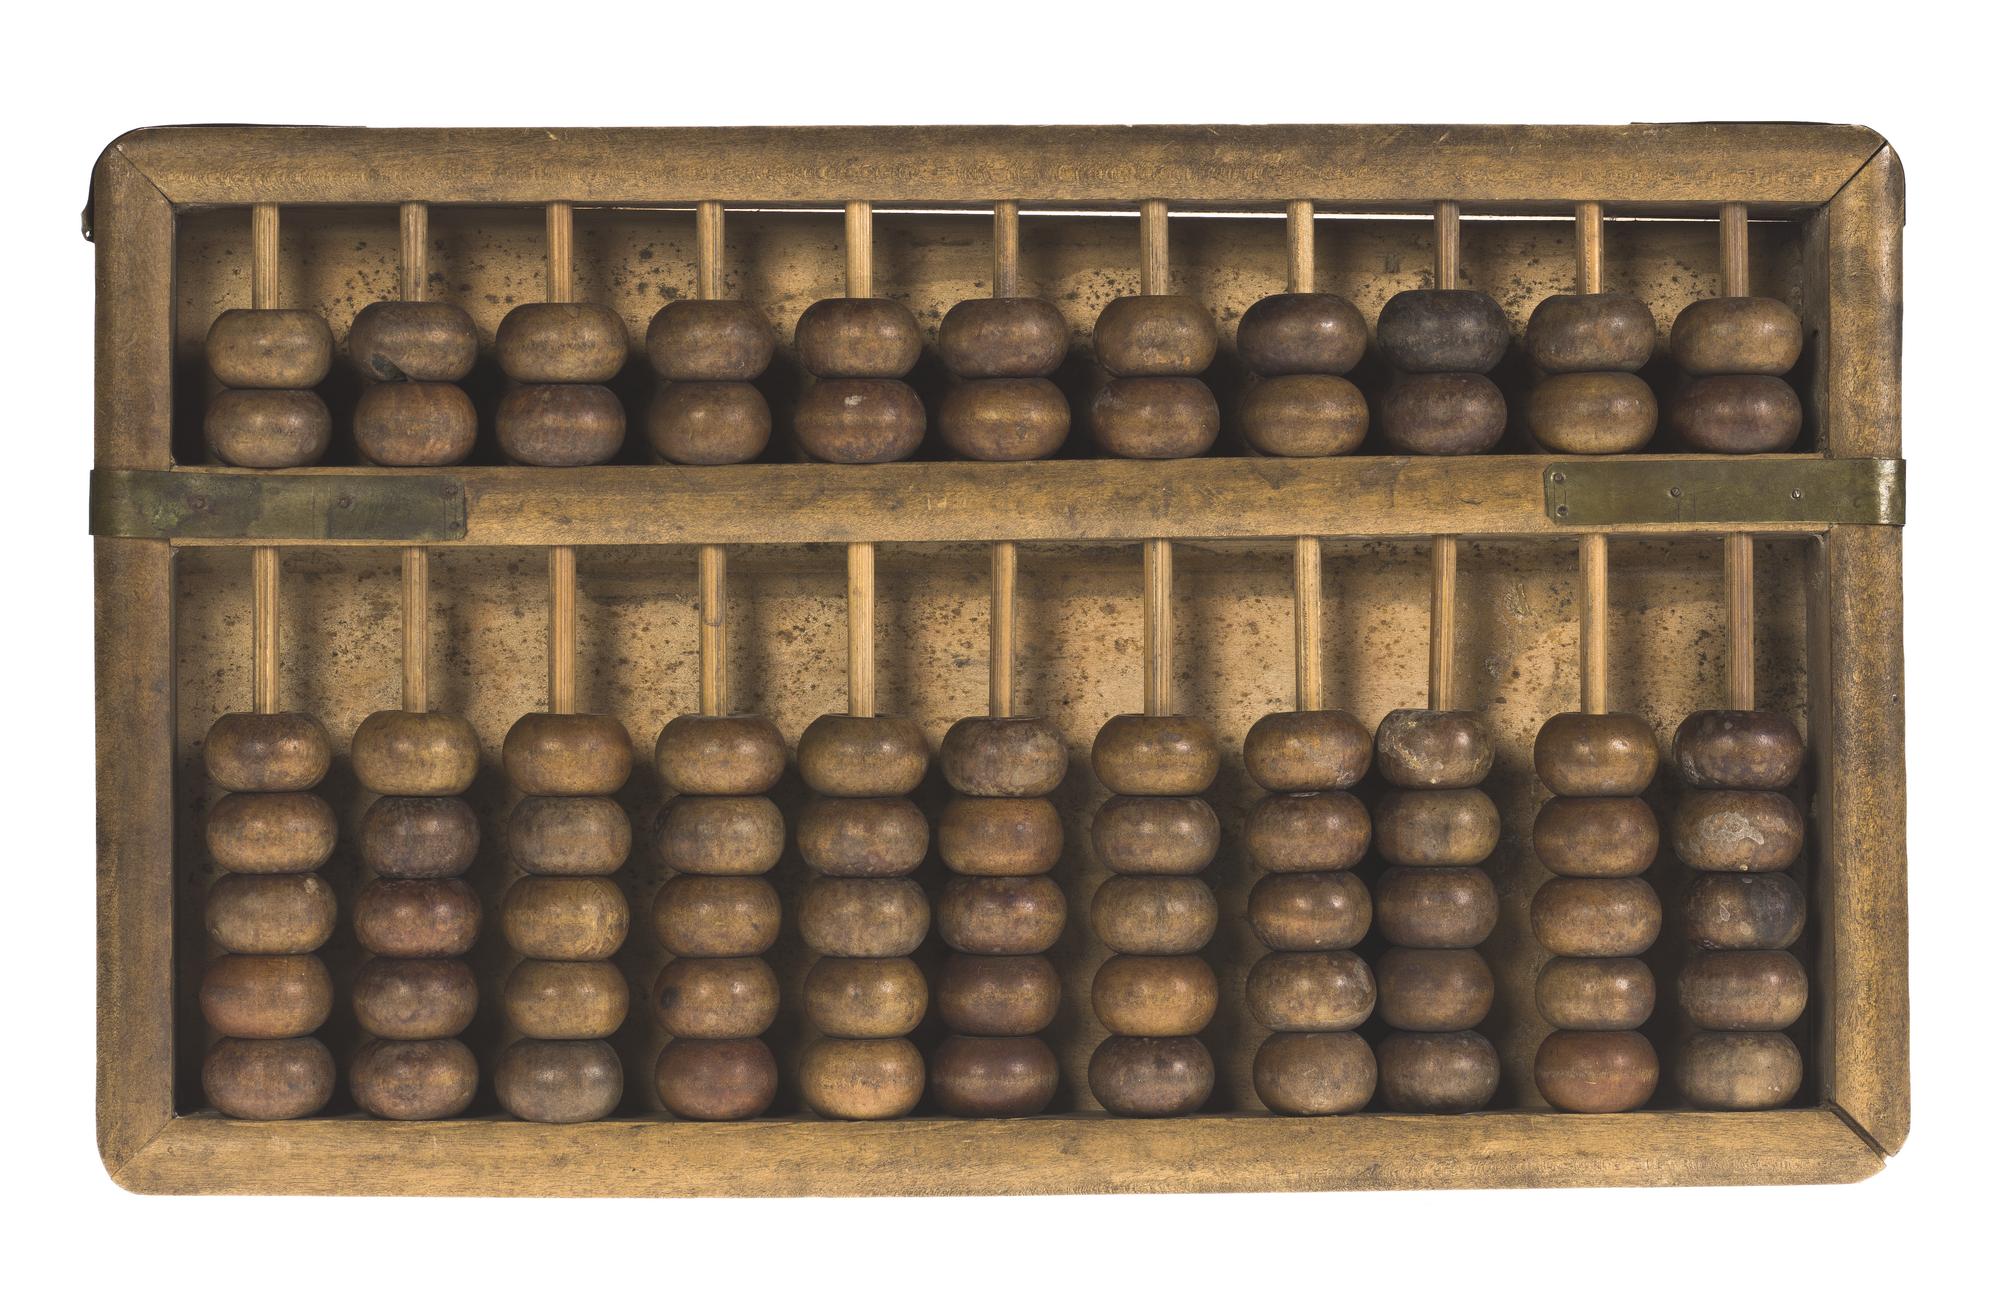 Suanpan (abacus) of wood and brass, used for both decimal and hexadecimal calculations: China, Qing Dynasty, early 20th century.